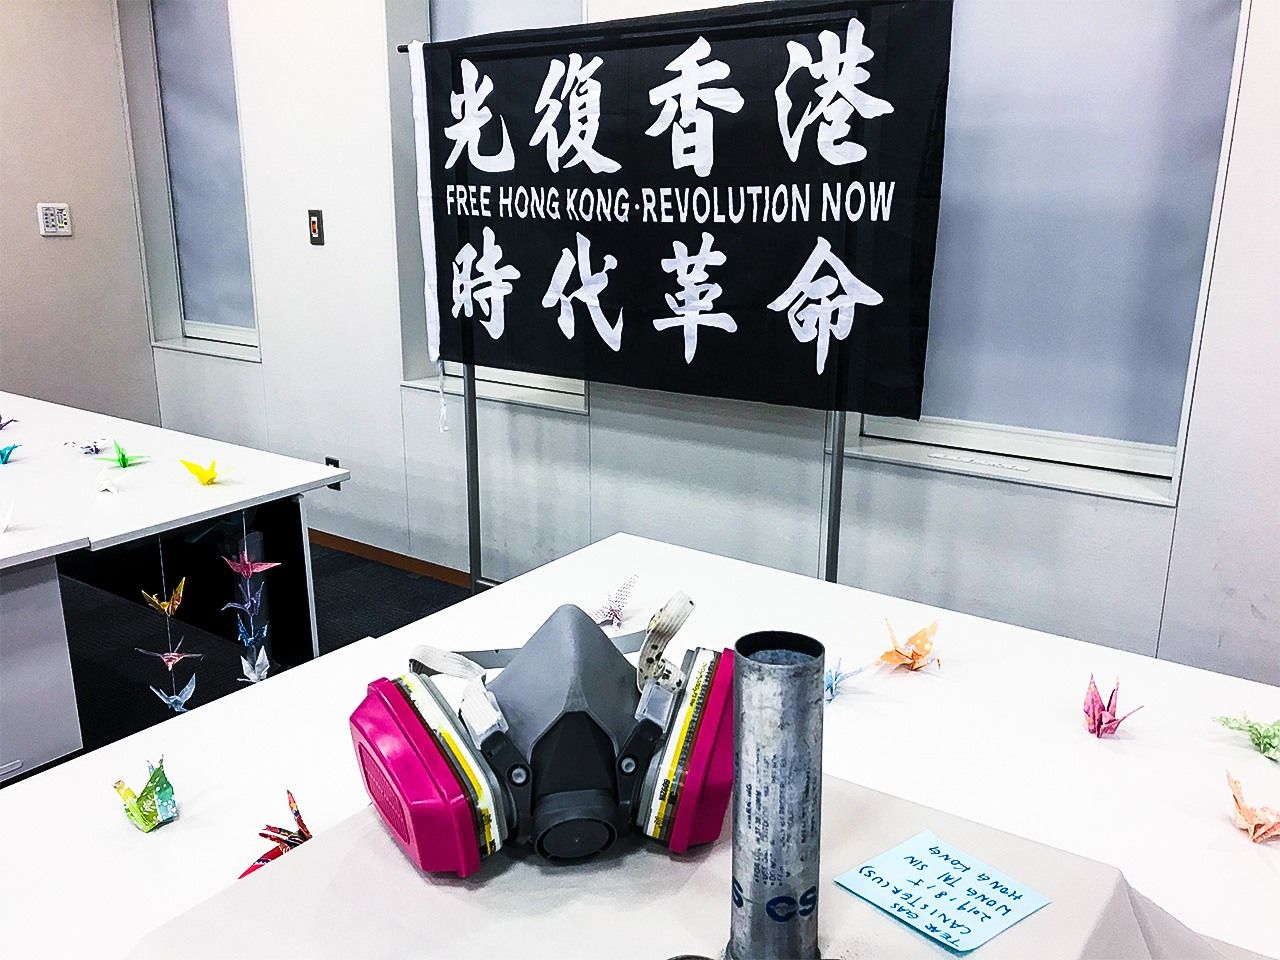 A scene from the “Global Solidarity” symposium held in Tokyo. Displays at the venue included gasmasks used by demonstrators, and empty tear-gas canisters.